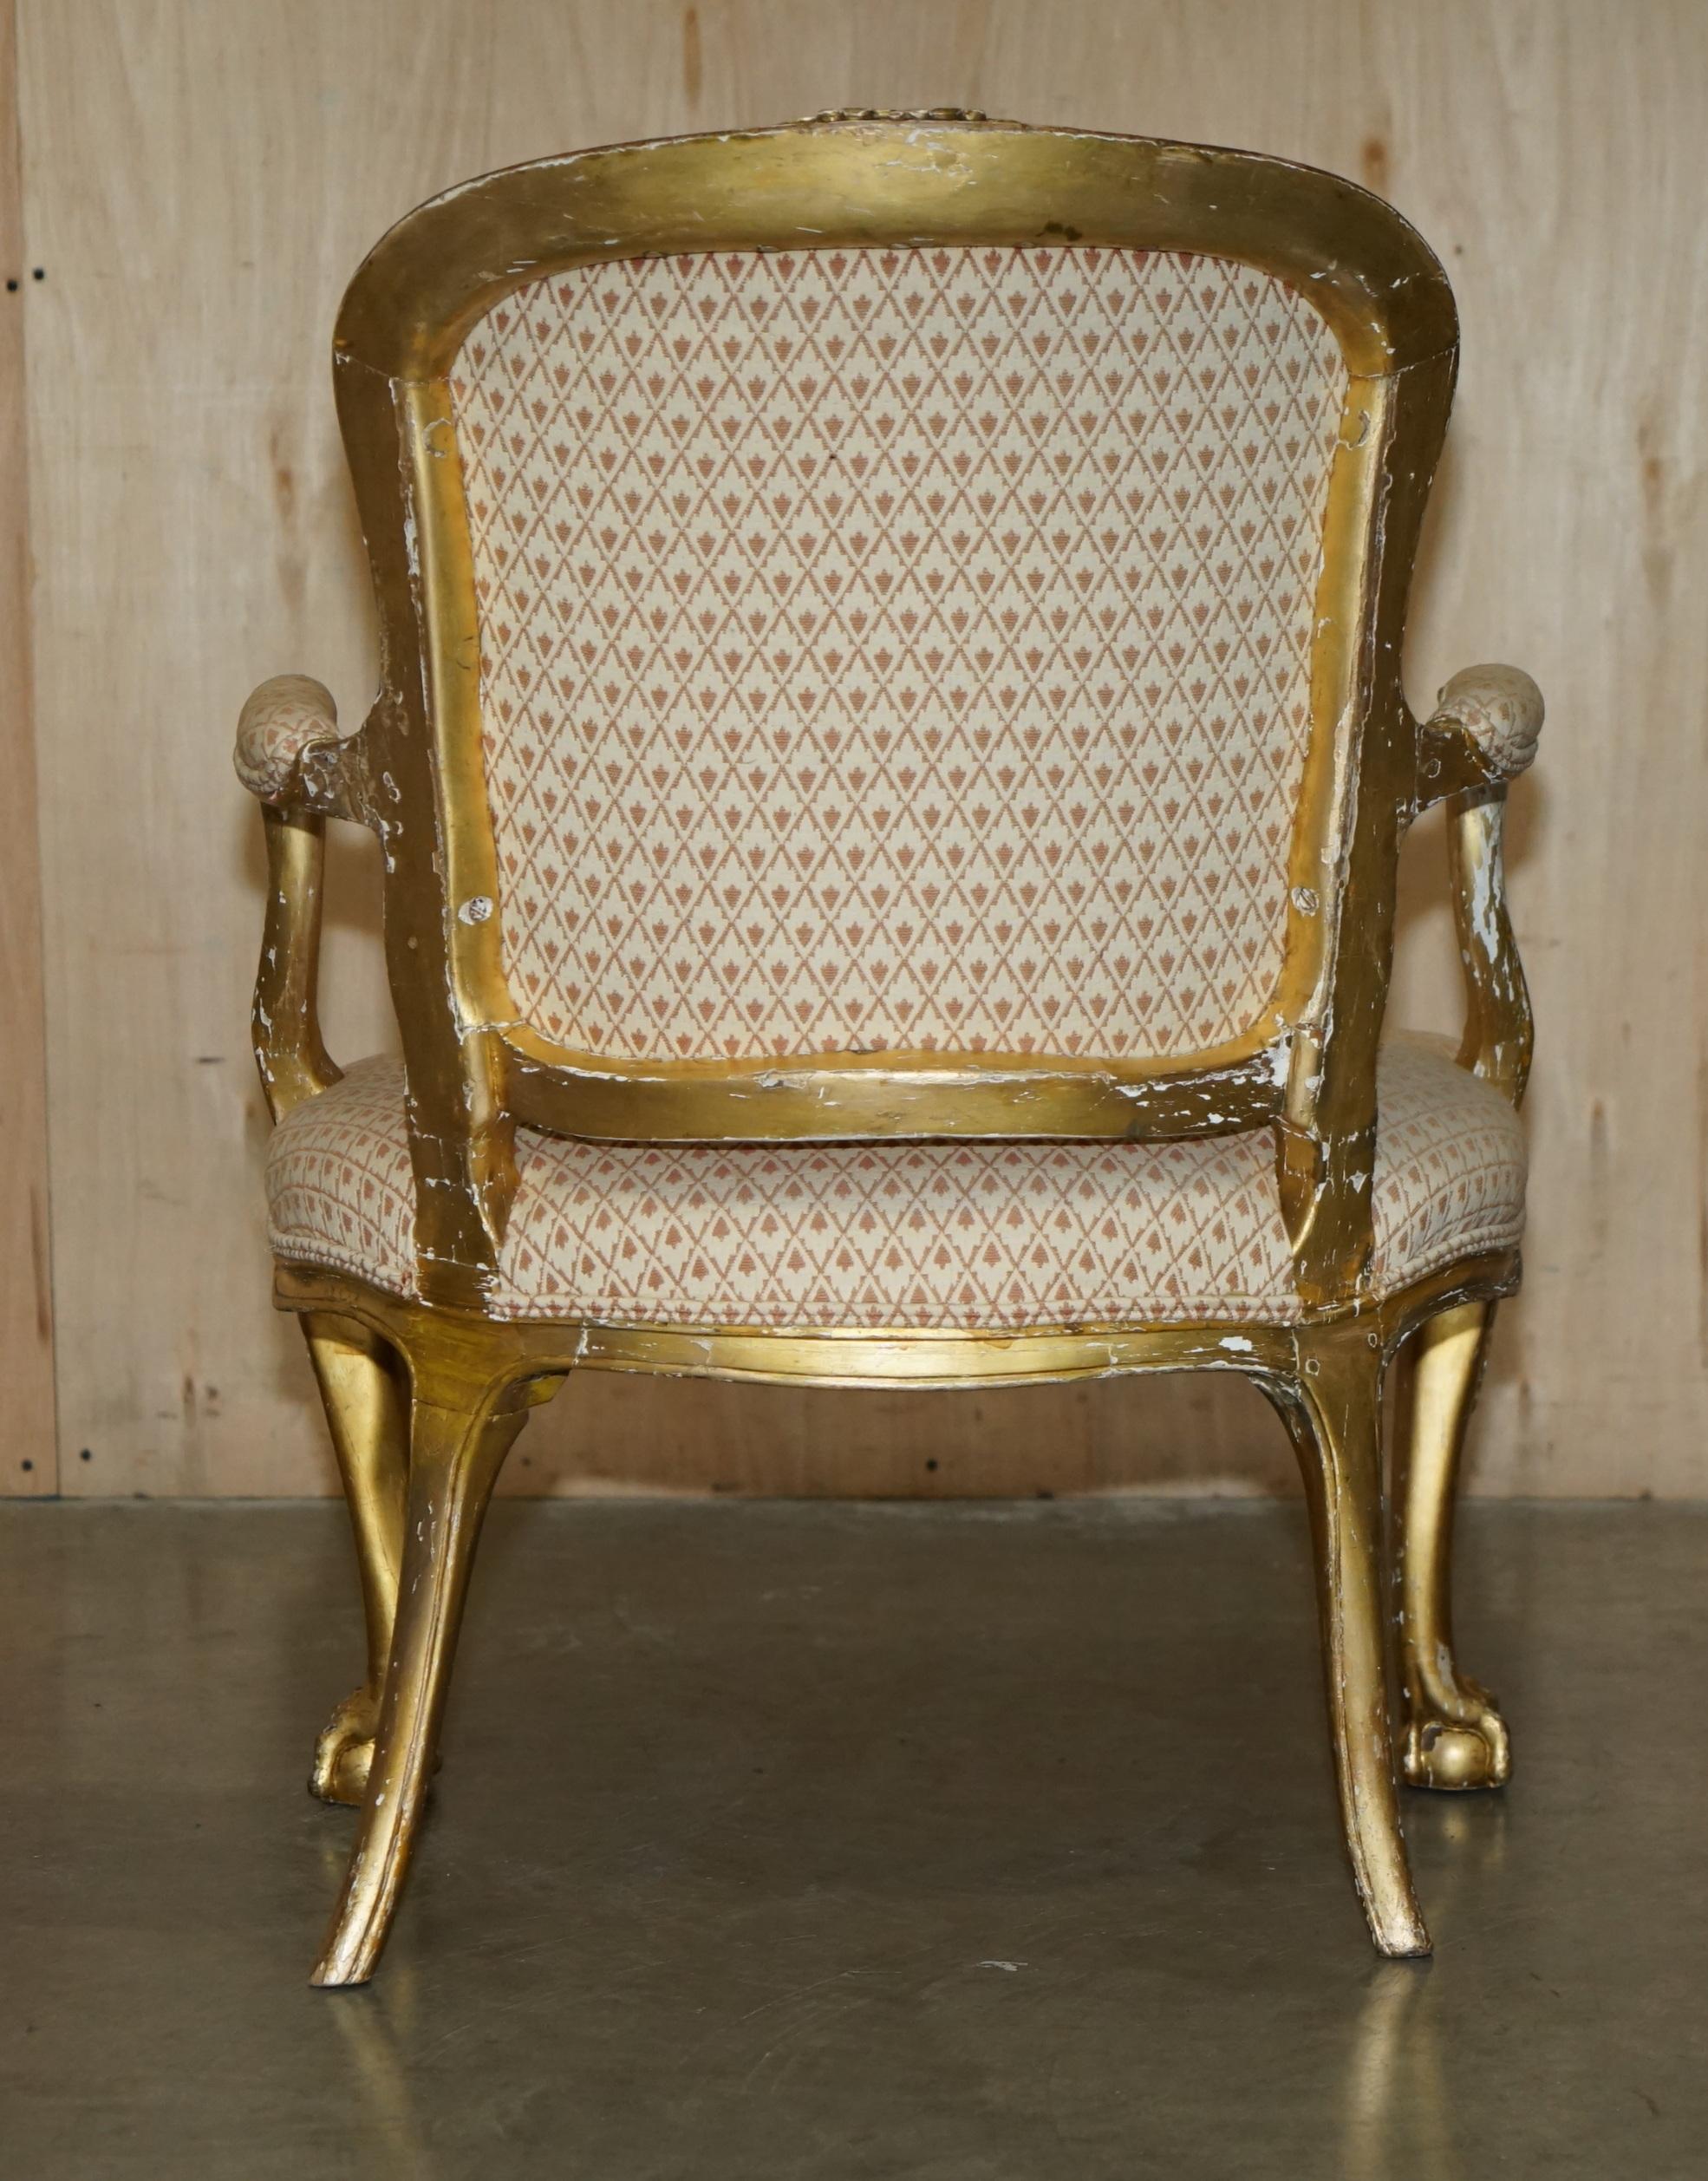 FINE GOLD GILTWOOD 18TH CENTURY CLAW & BALL FEET CARVED ANTIQUE BERGERE ARMCHAiR For Sale 10